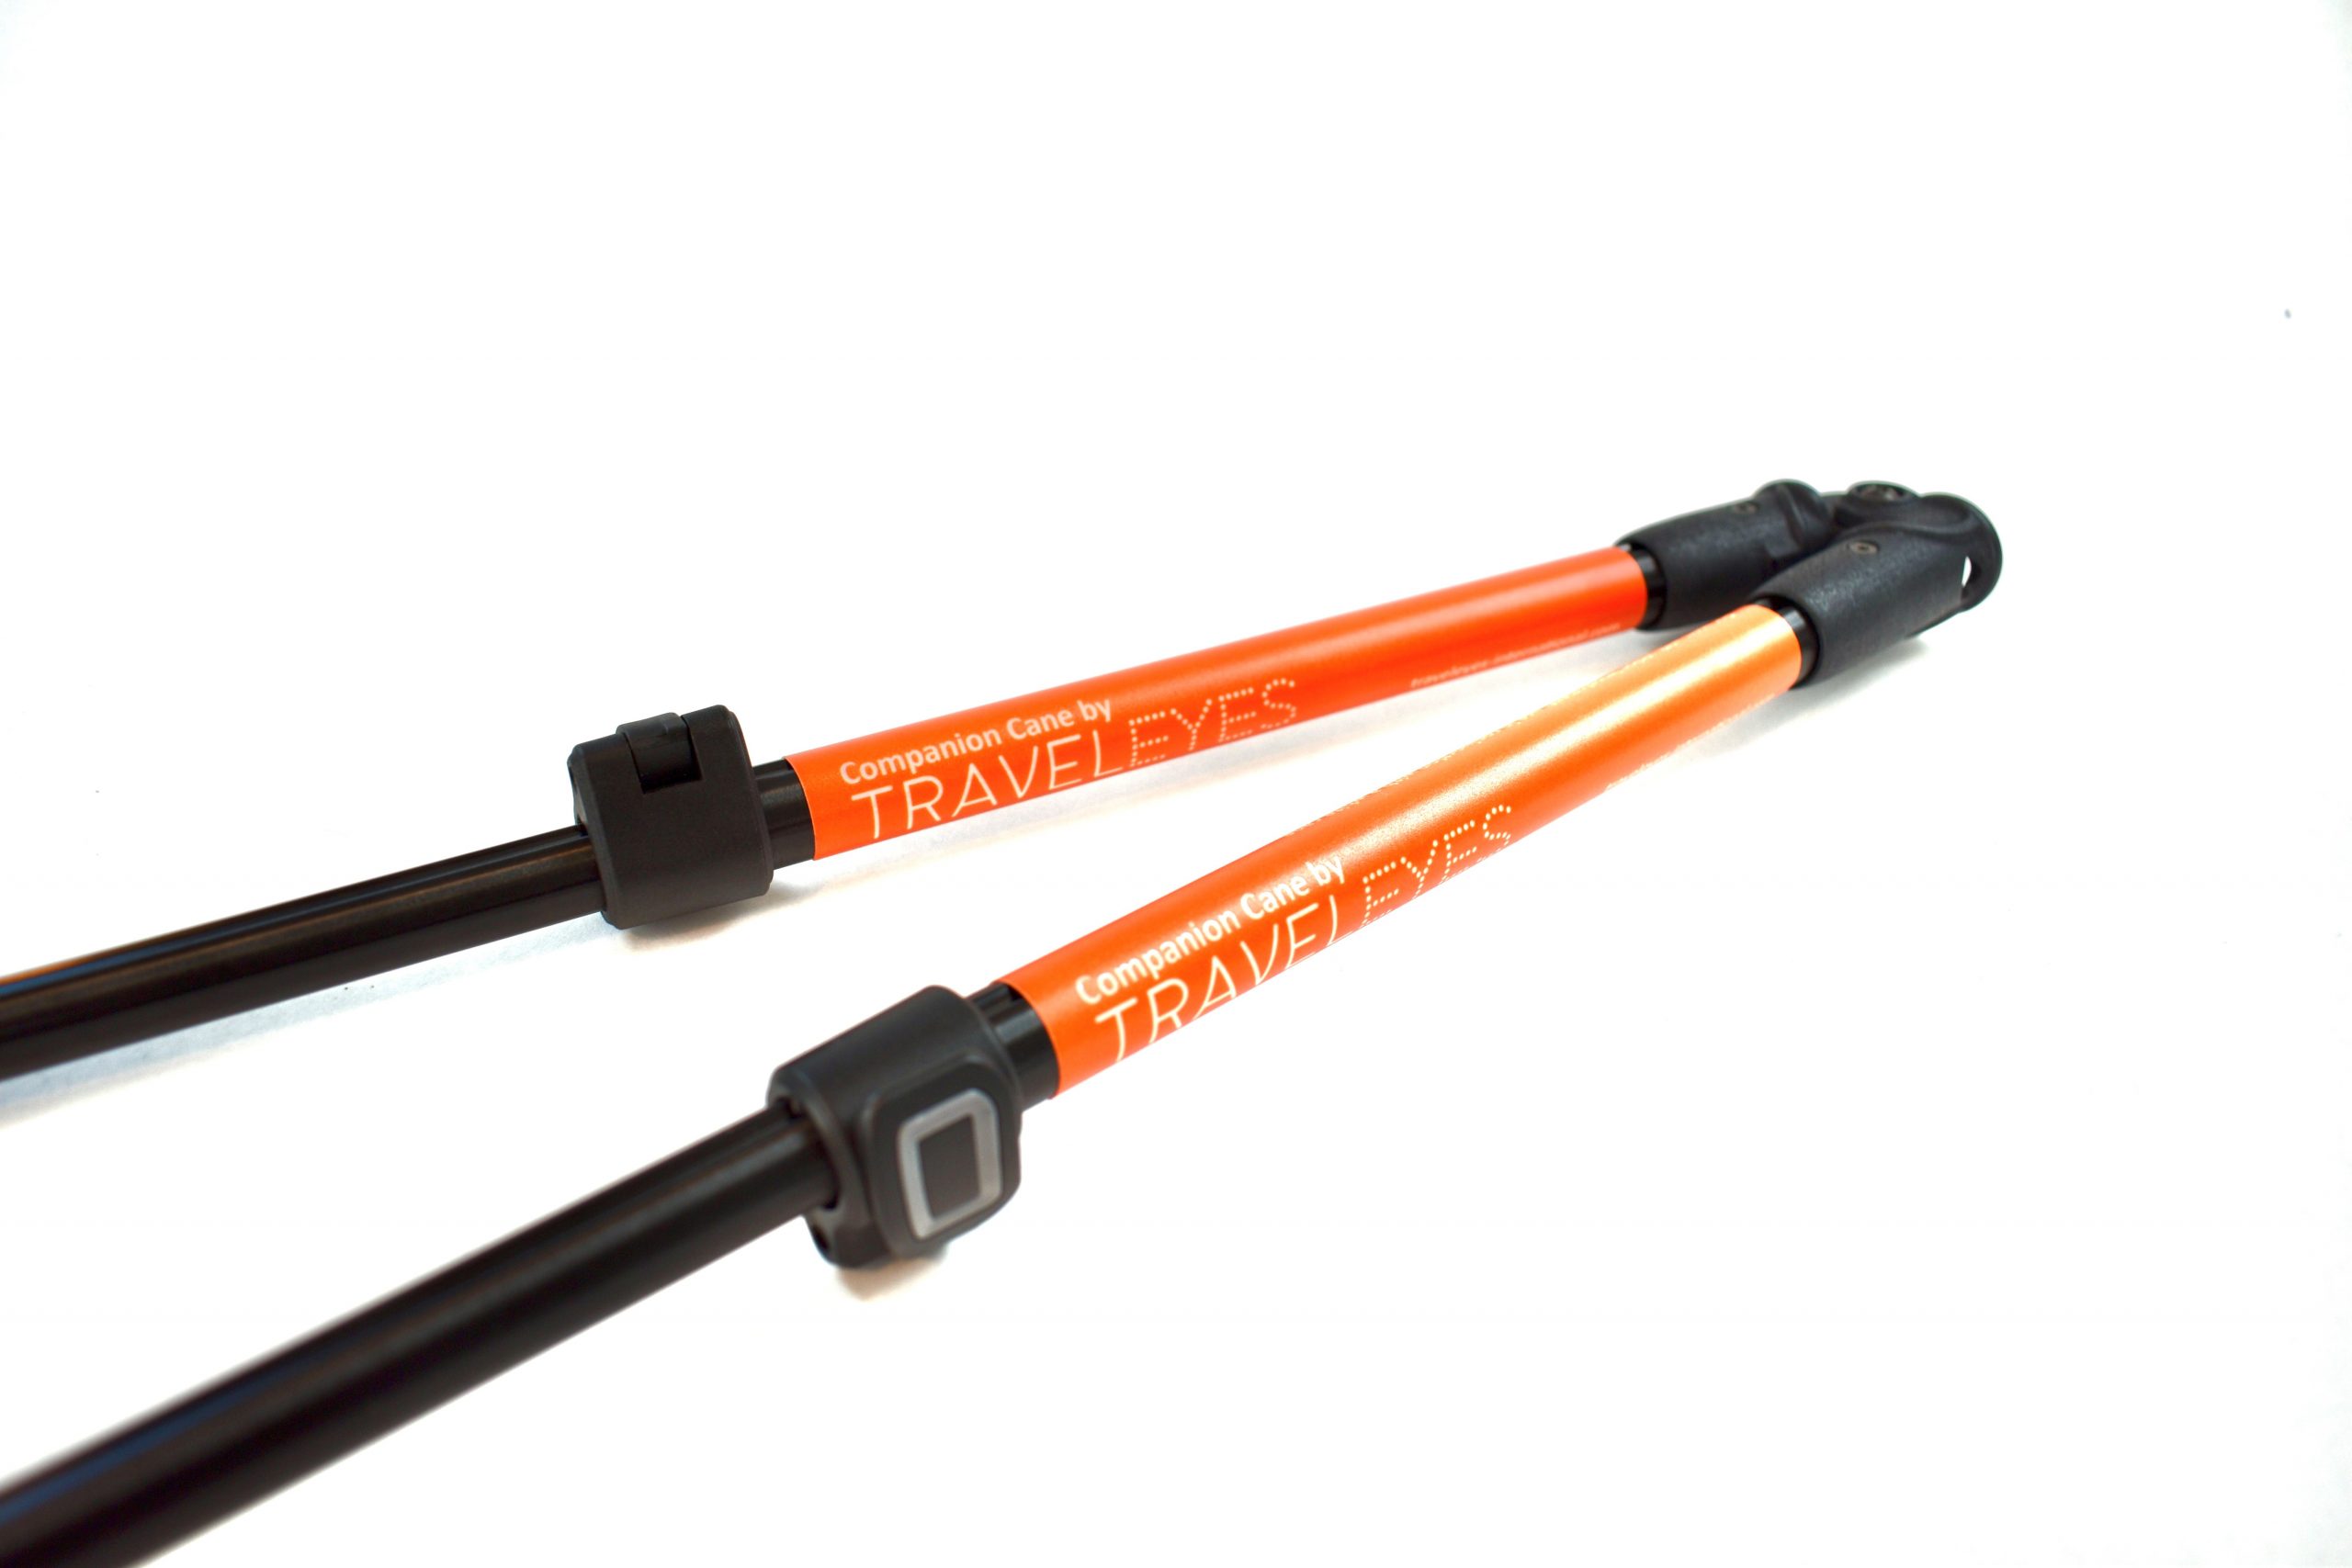 Photo description: A close up showing the two inner poles with the orange TE labels, the clasps used to hold the poles length and the black hinge that allows the cane to fold